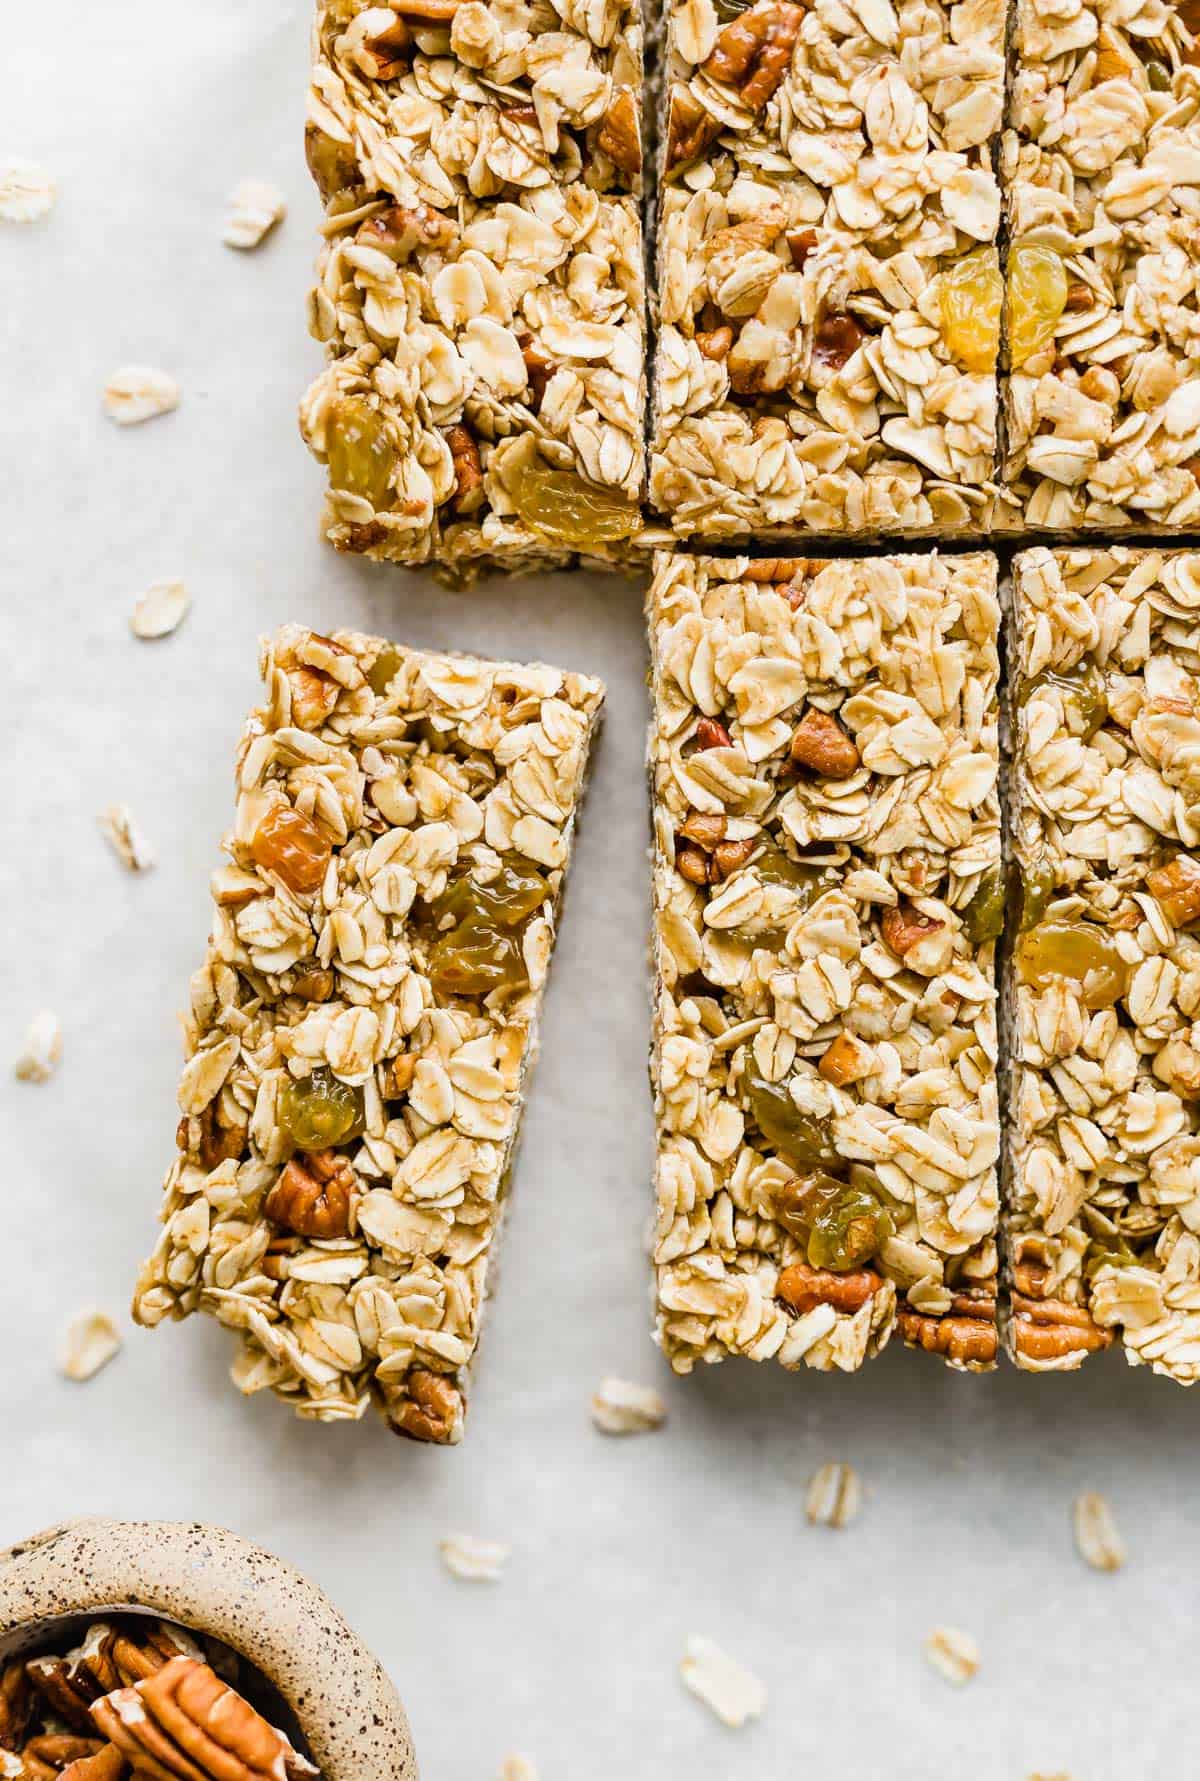 Homemade granola bars filled with rolled oats, nuts, and golden raisins, cut into bars on a white background.